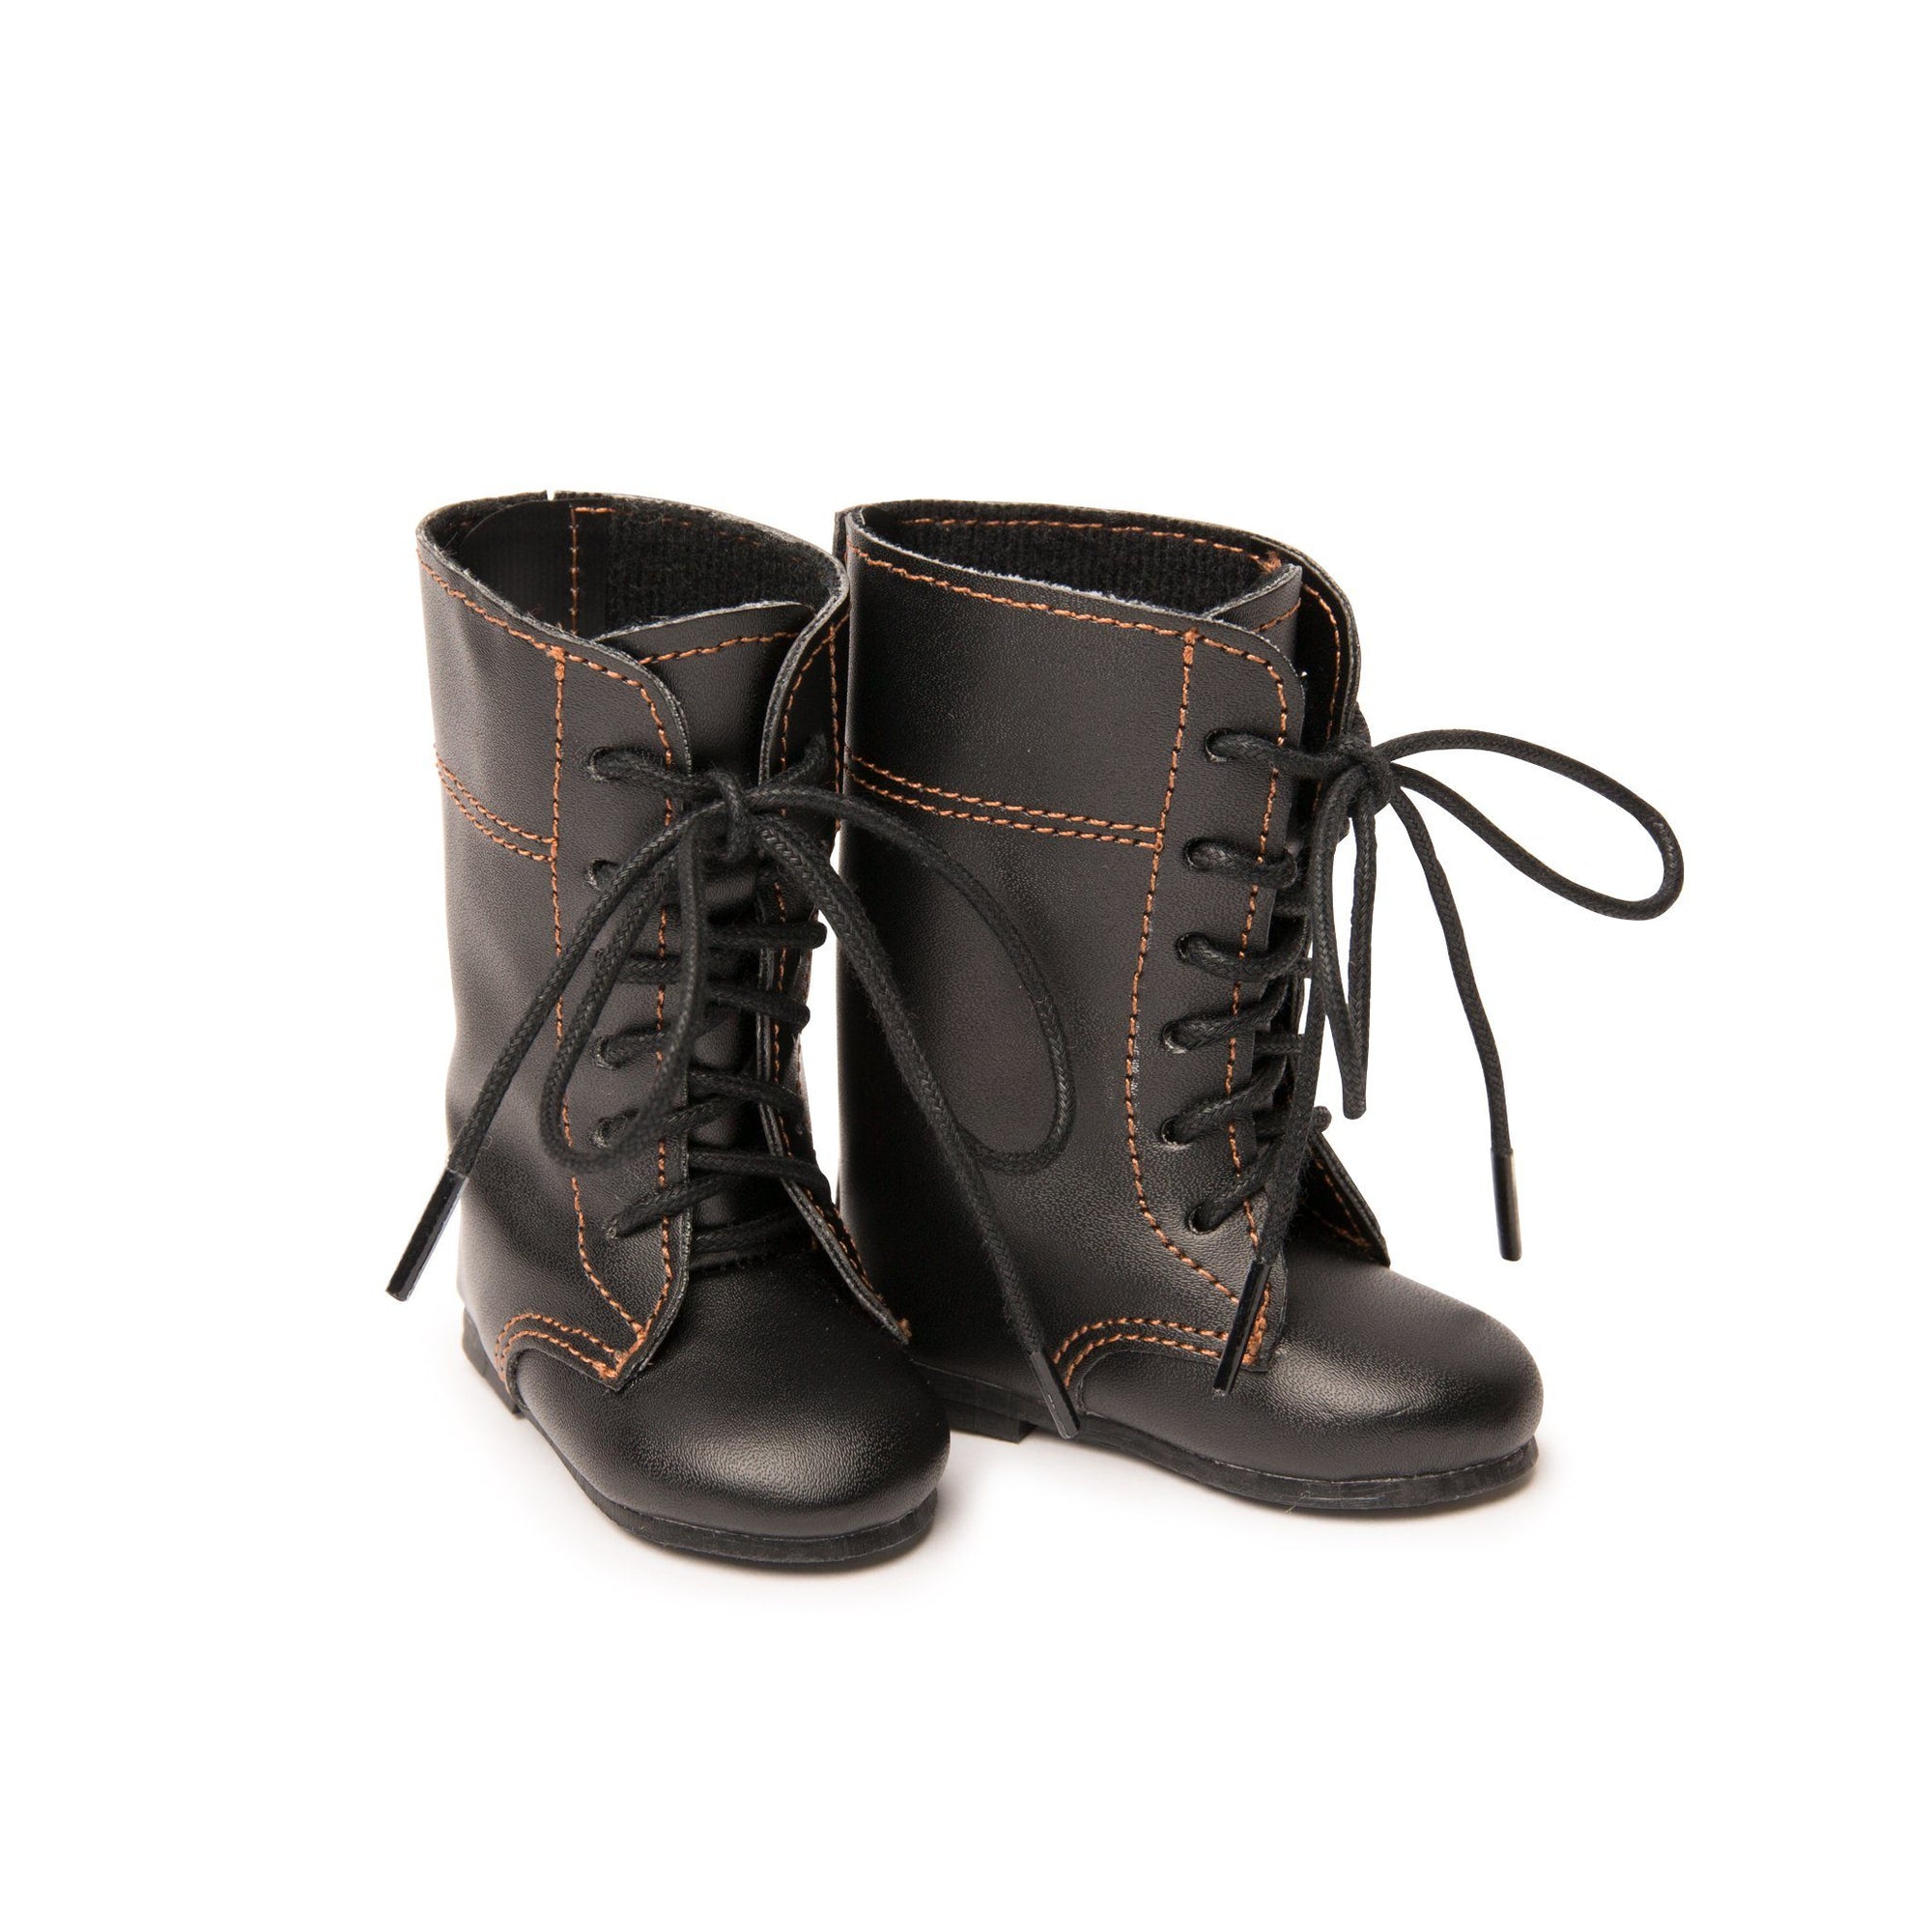 tall black lace up boots